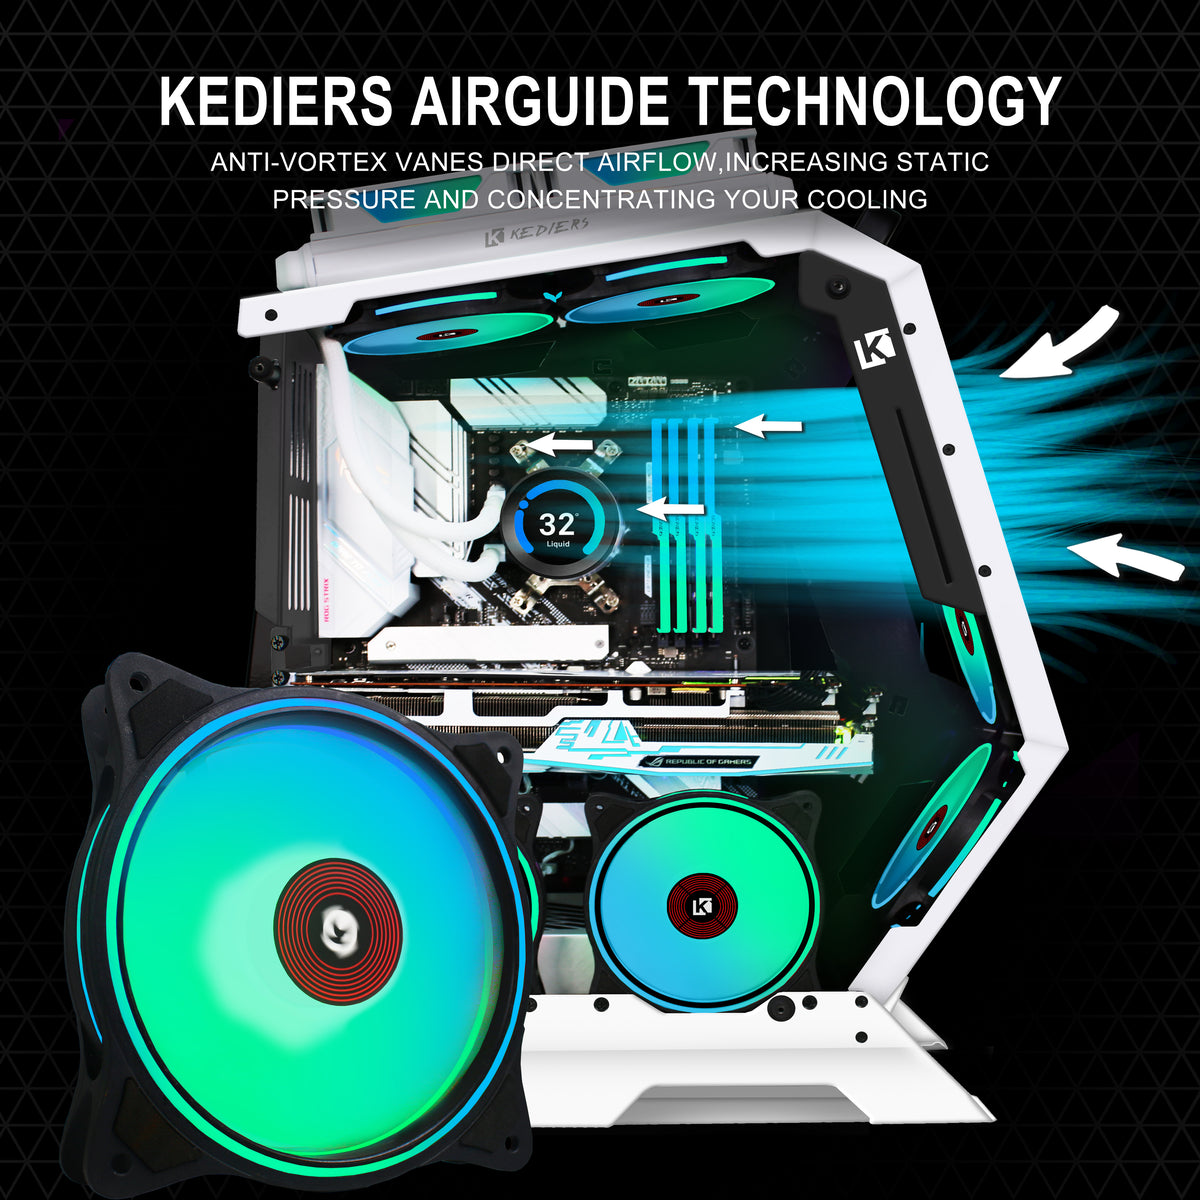 KEDIERS PC Case - ATX Tower Tempered Glass Gaming Computer Open Frame Case  with 7 ARGB Fans